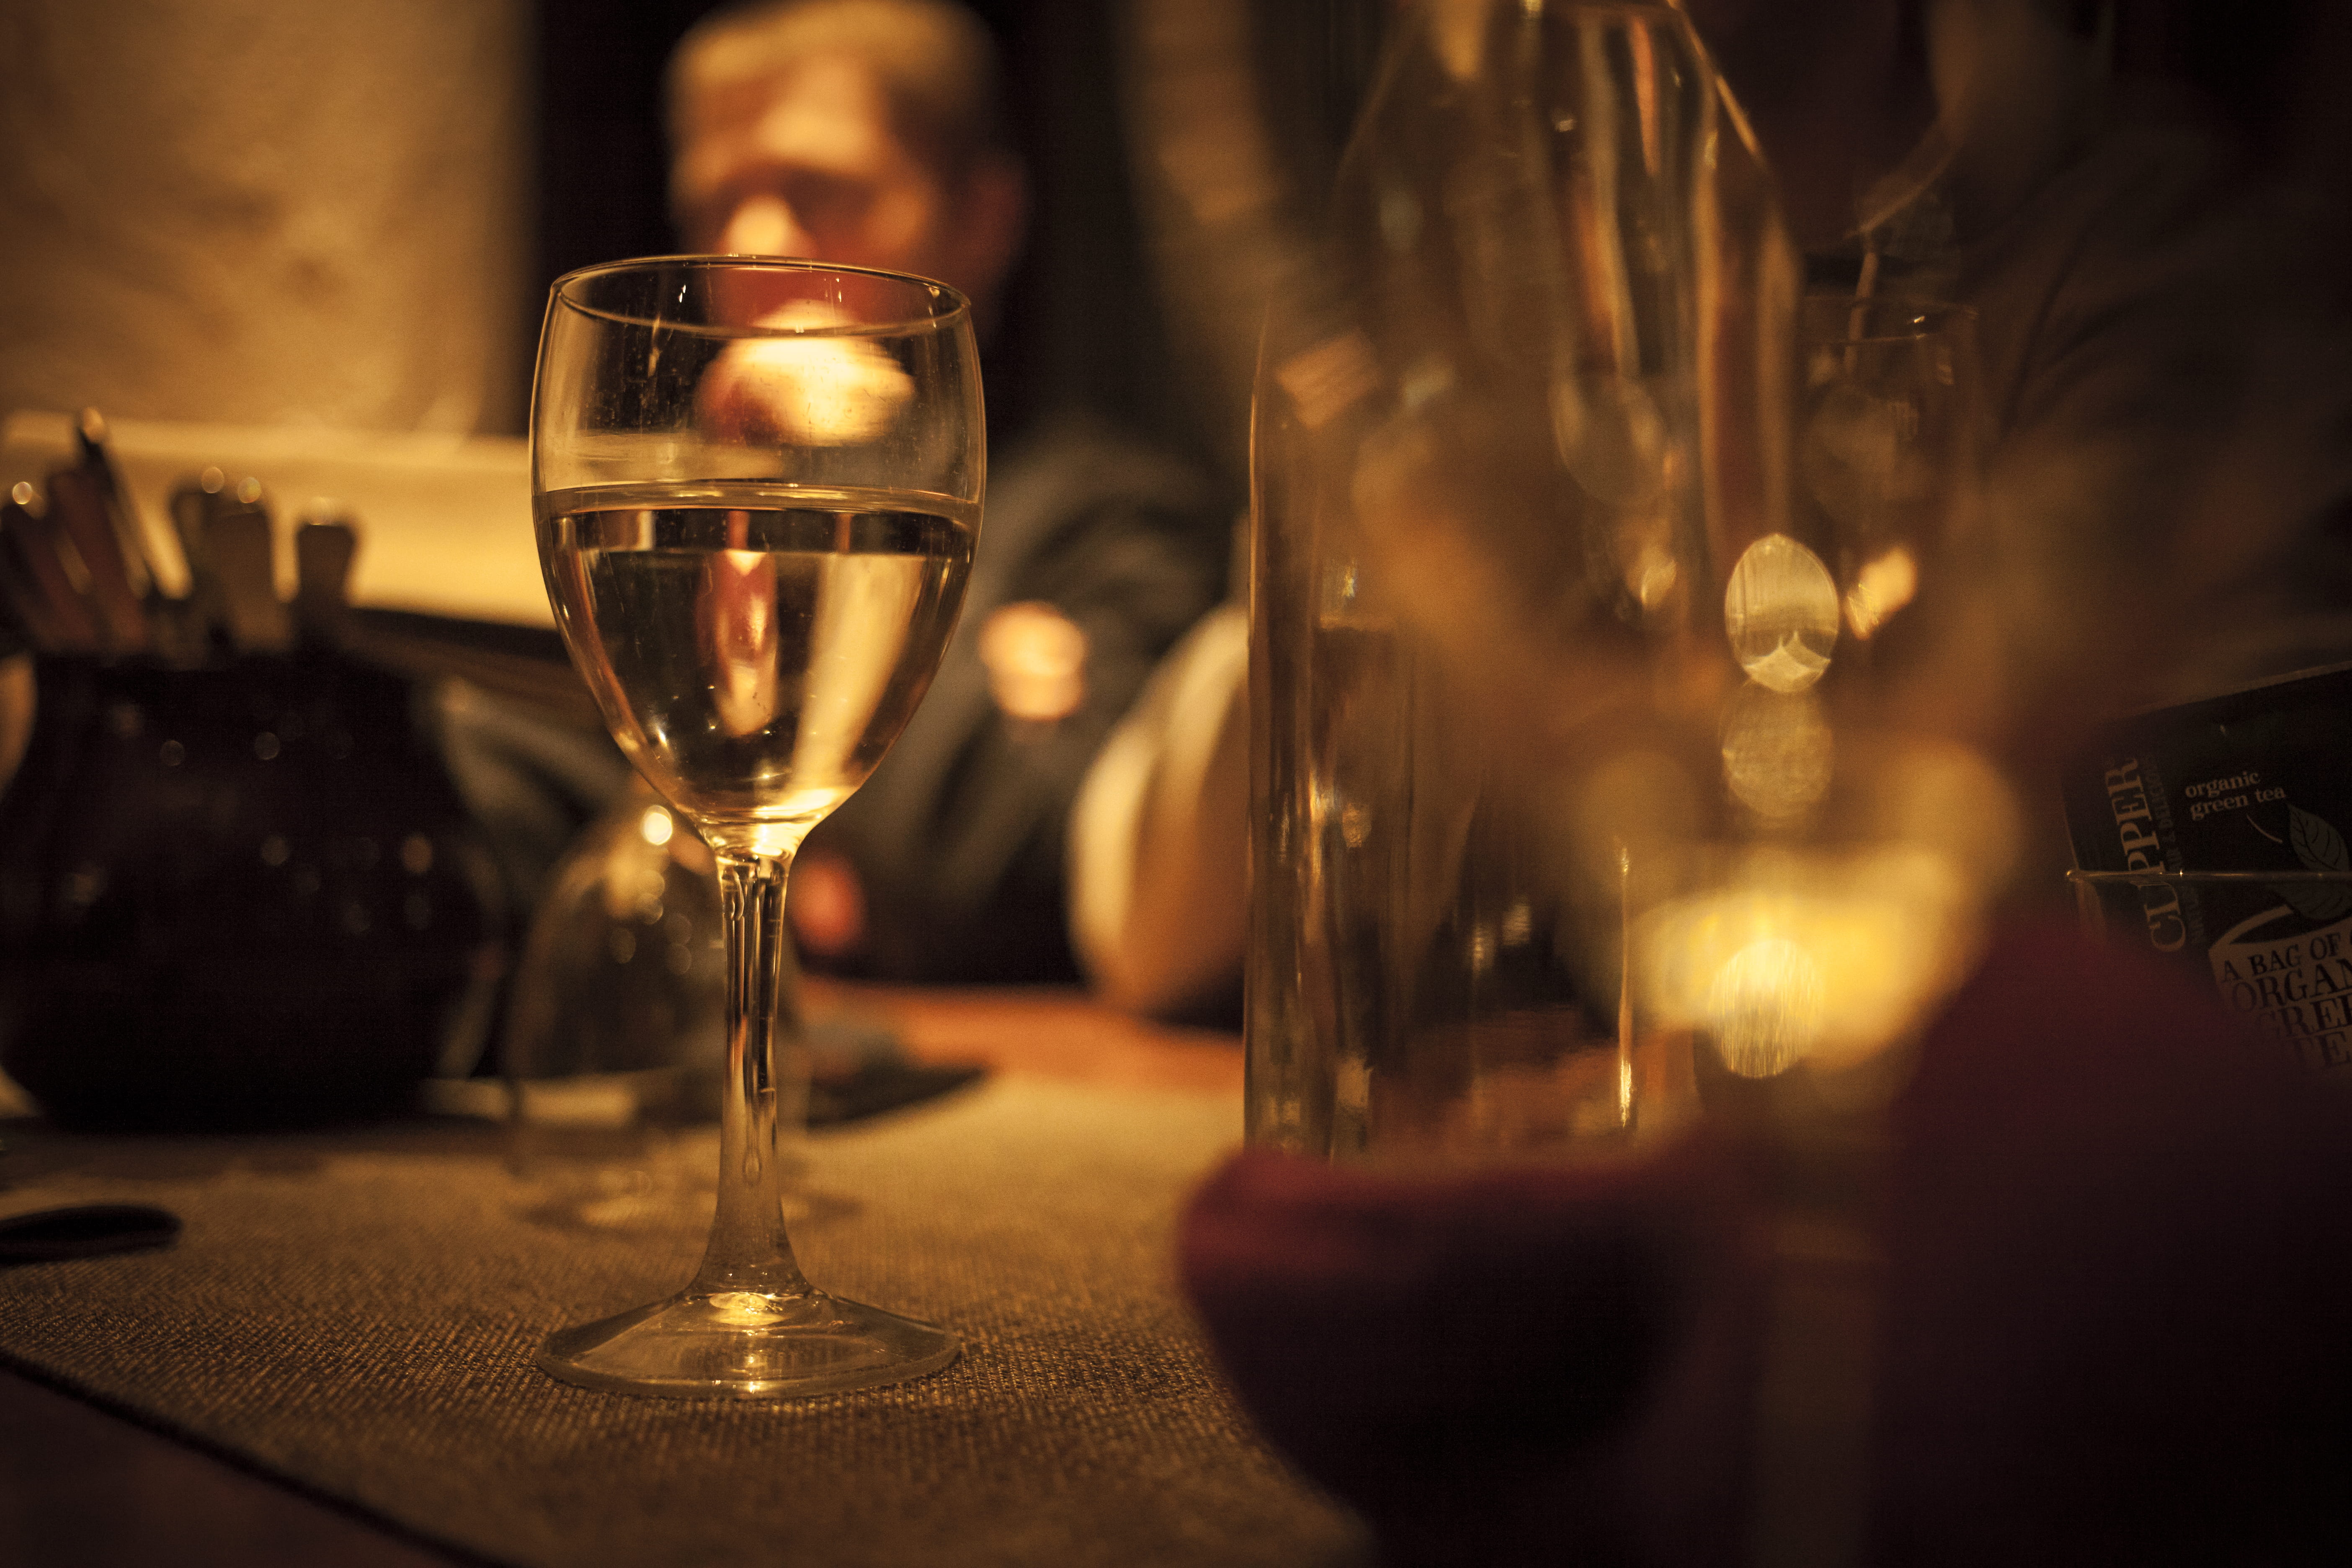 restaurant, wine, glass, table, dinner, bokeh, cup, cafe, refreshment